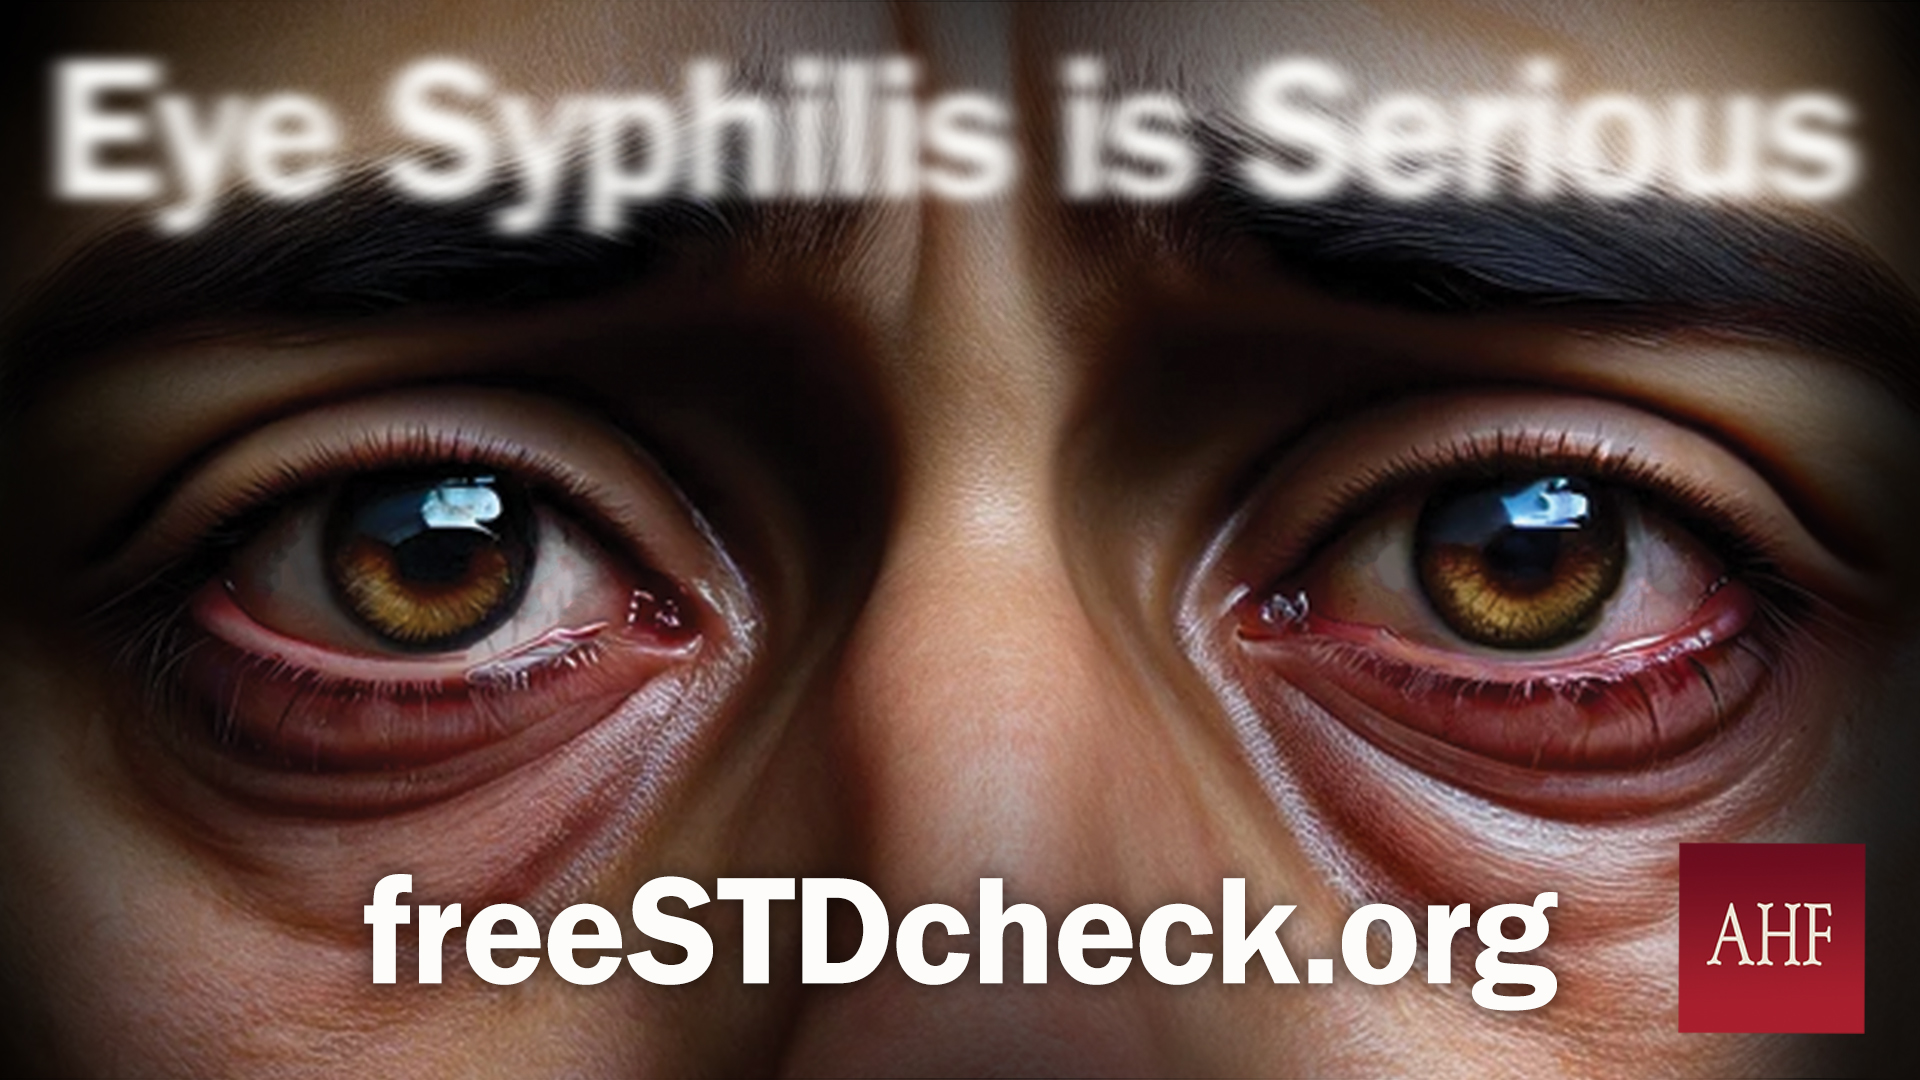 Featured image for ““Eye Syphilis is Serious” Campaign Description & Collateral”